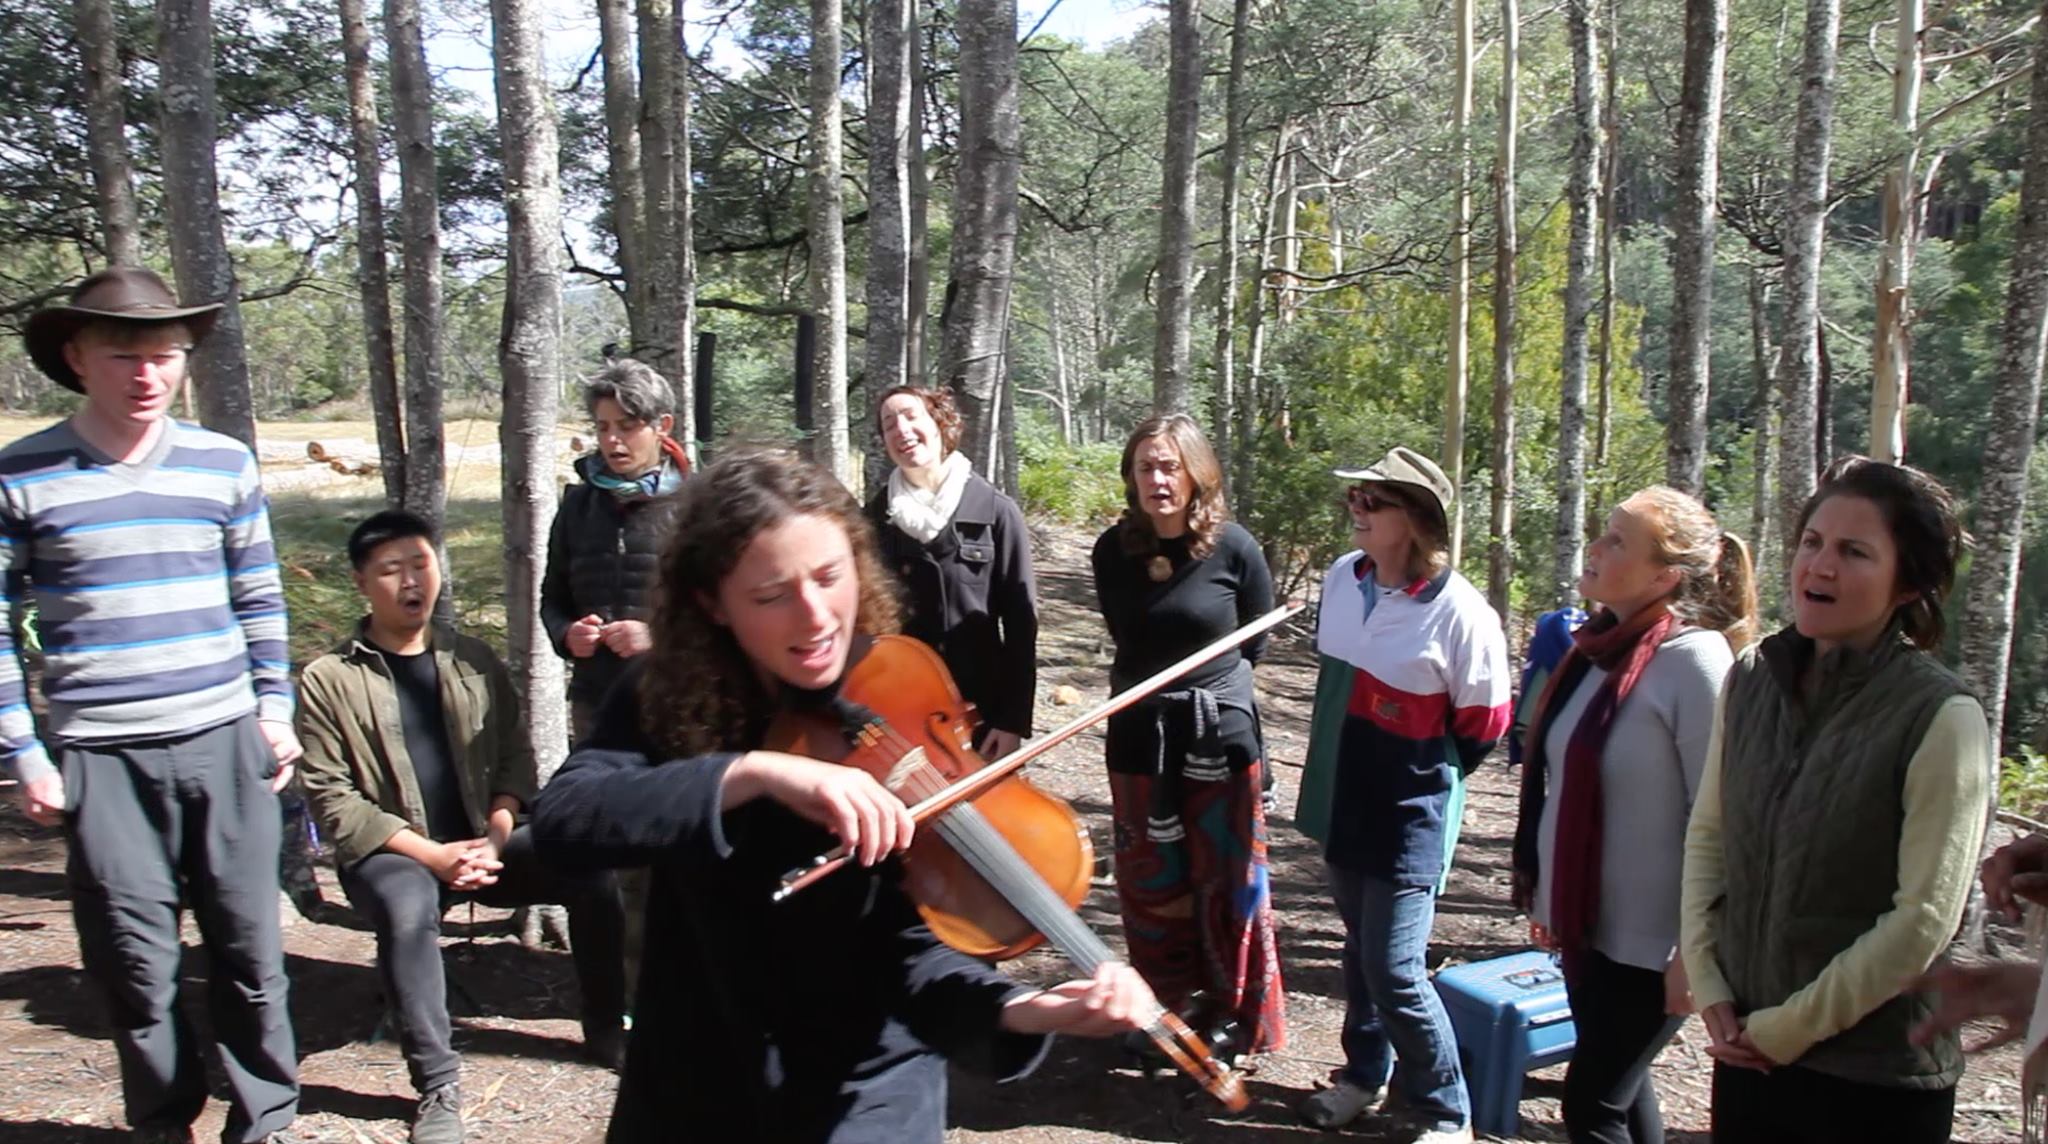 Skyglass conduct a workshop for choristers in a forest in Tassie